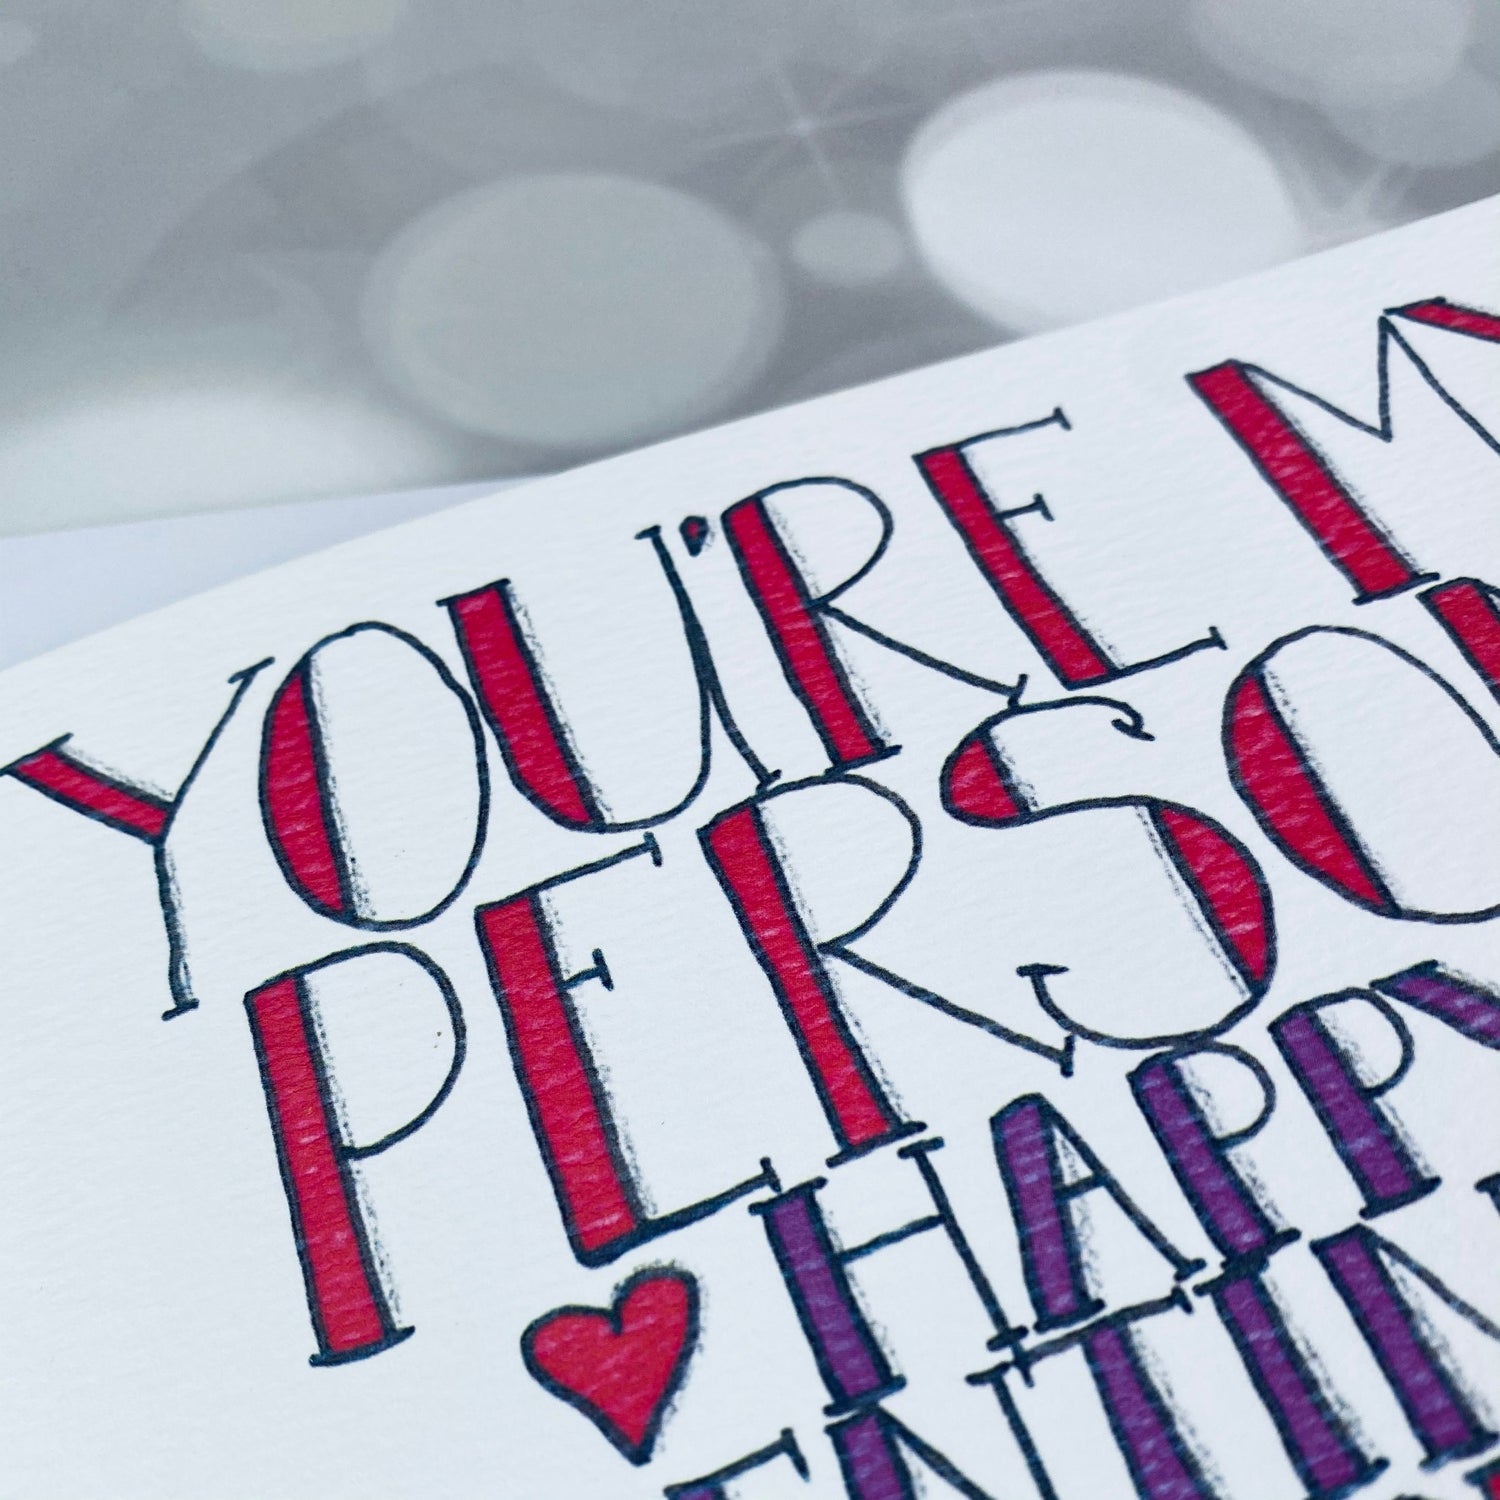 witty-valentines-cards